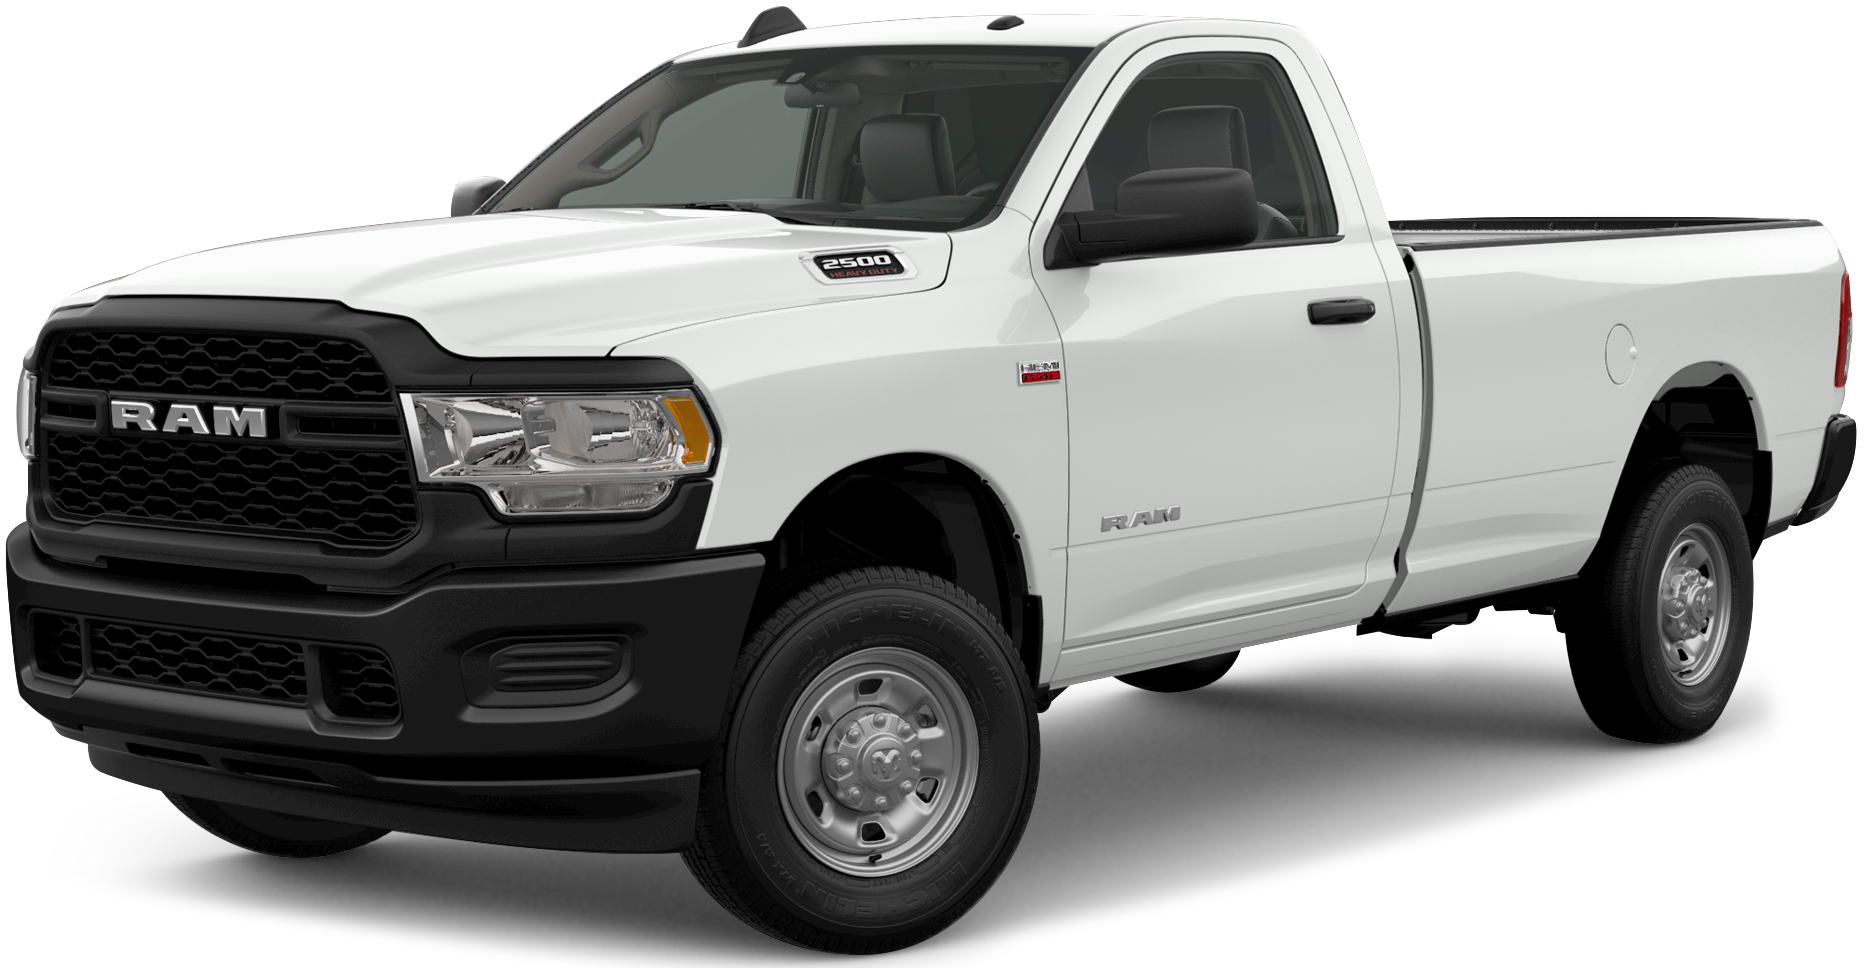 2019 Ram 2500 Incentives Specials Offers In Avondale AZ